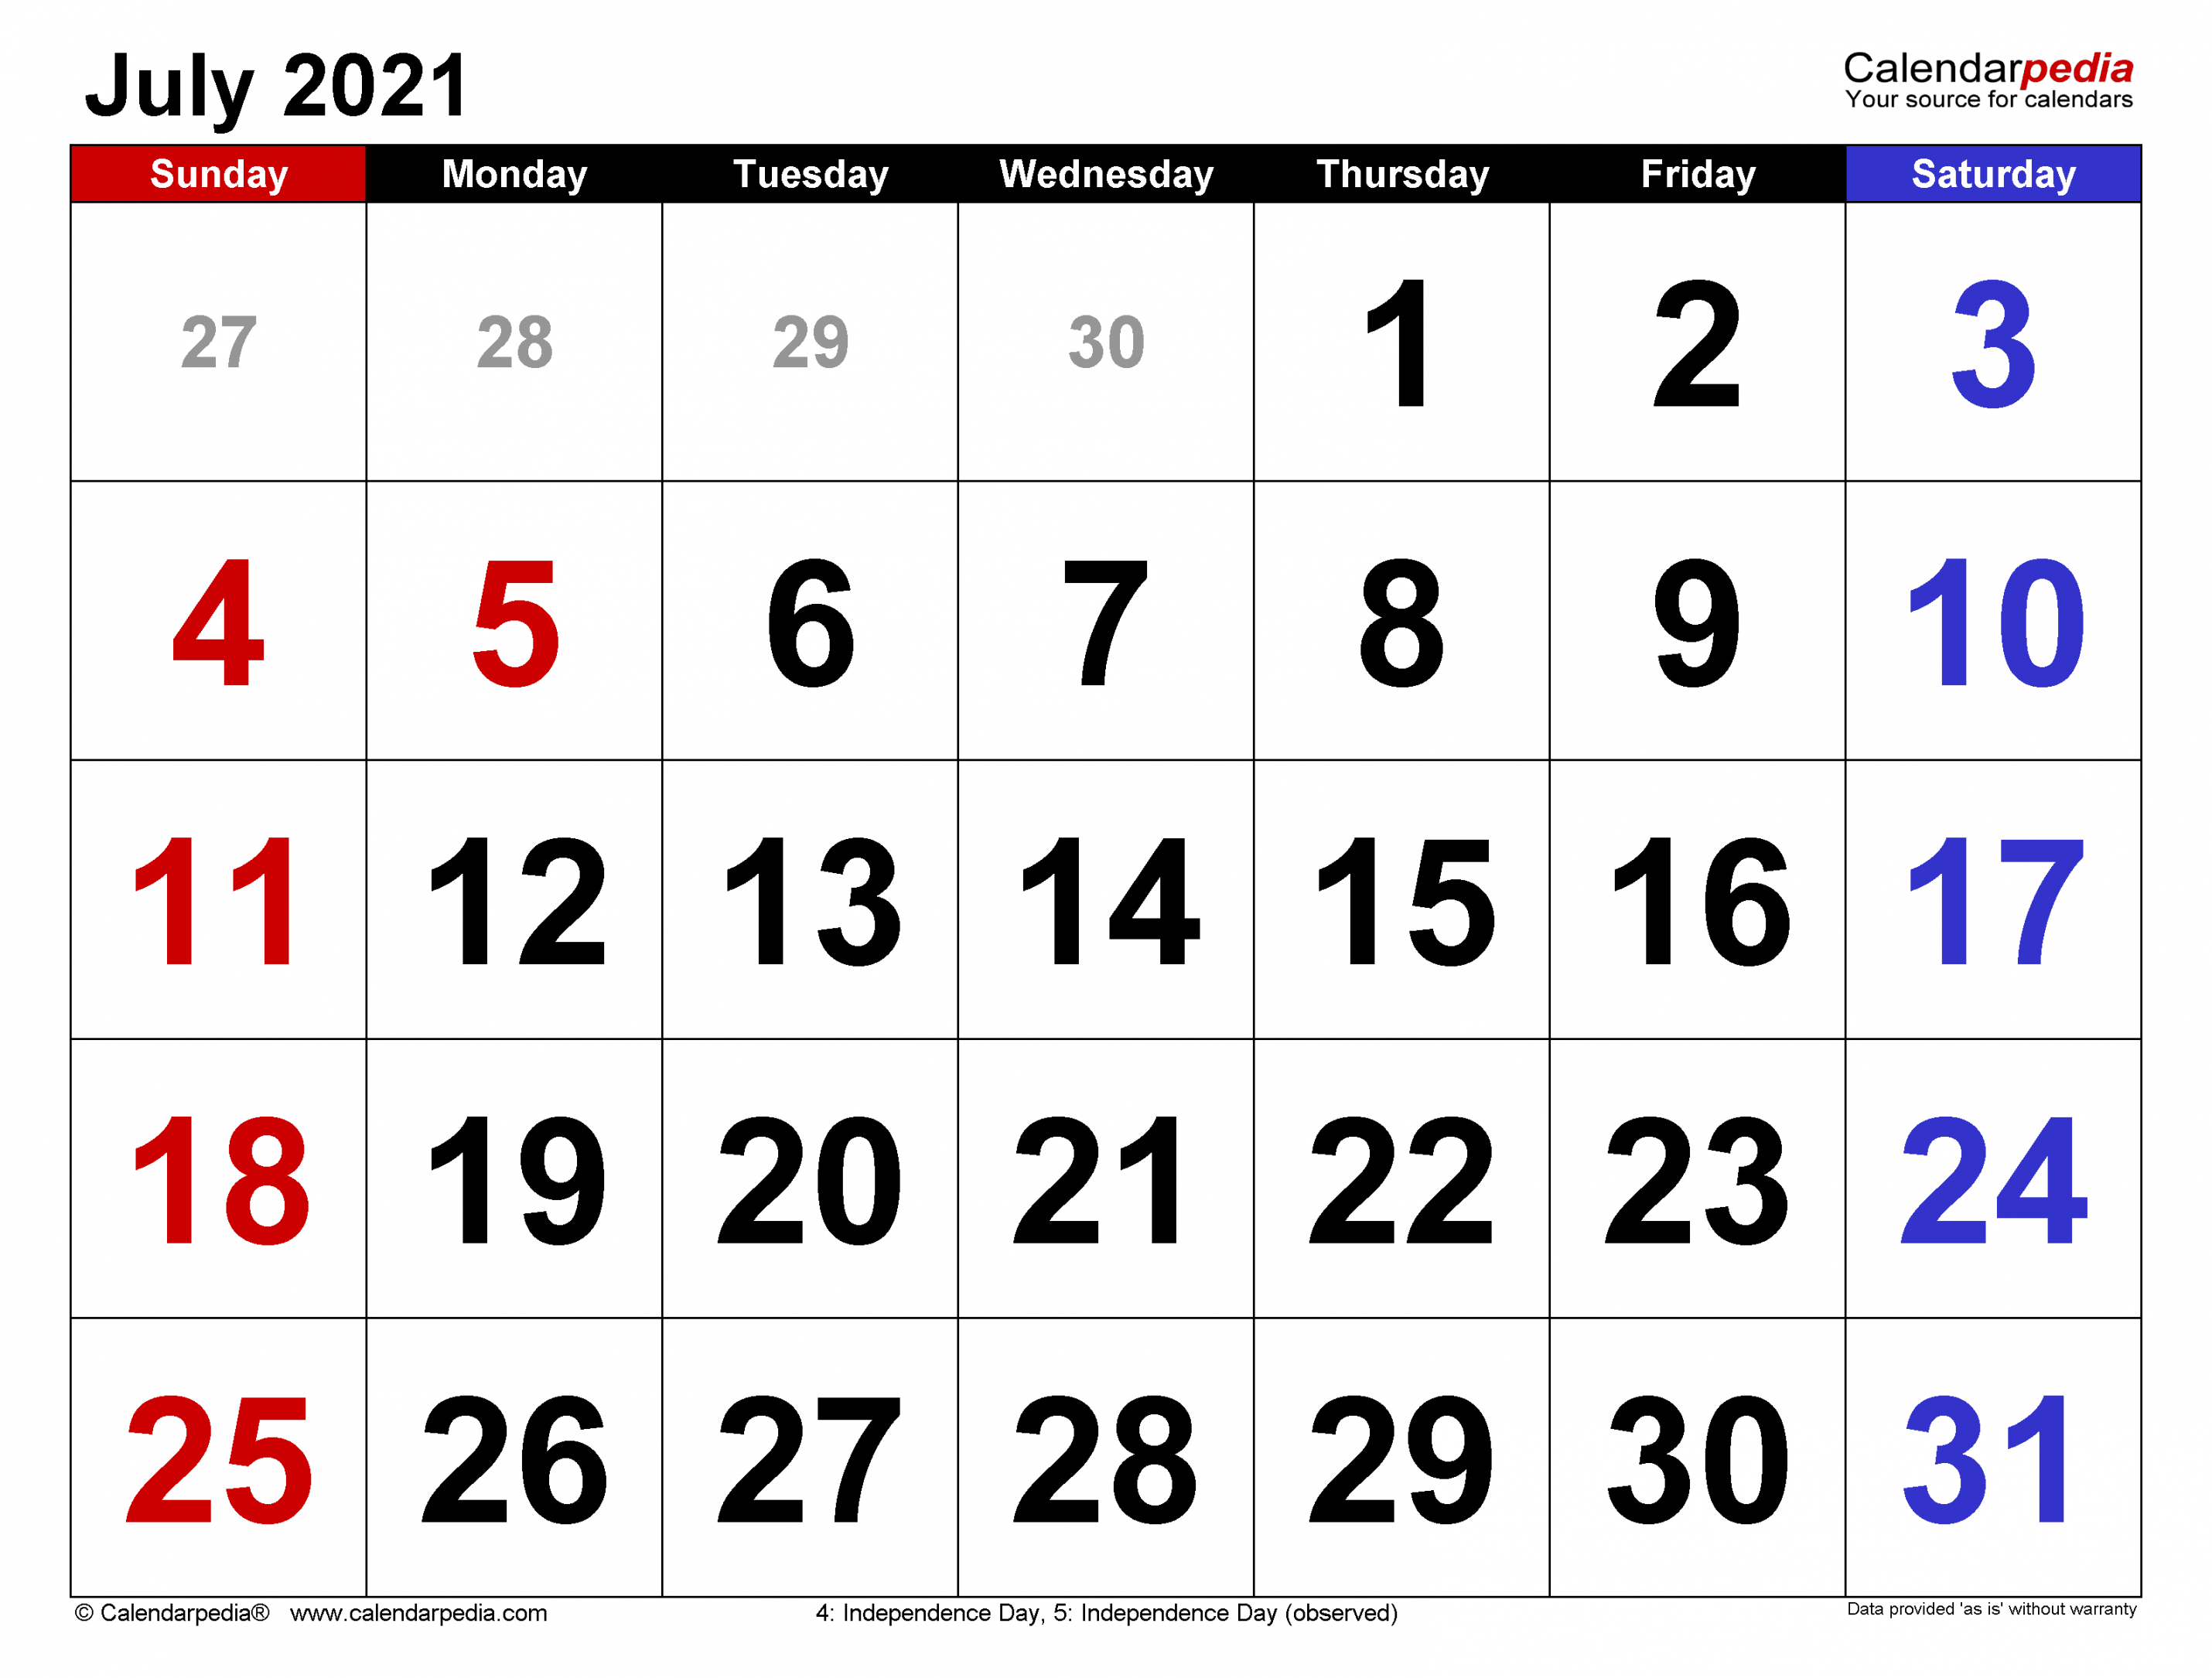 July Calendar Templates for Word, Excel and PDF